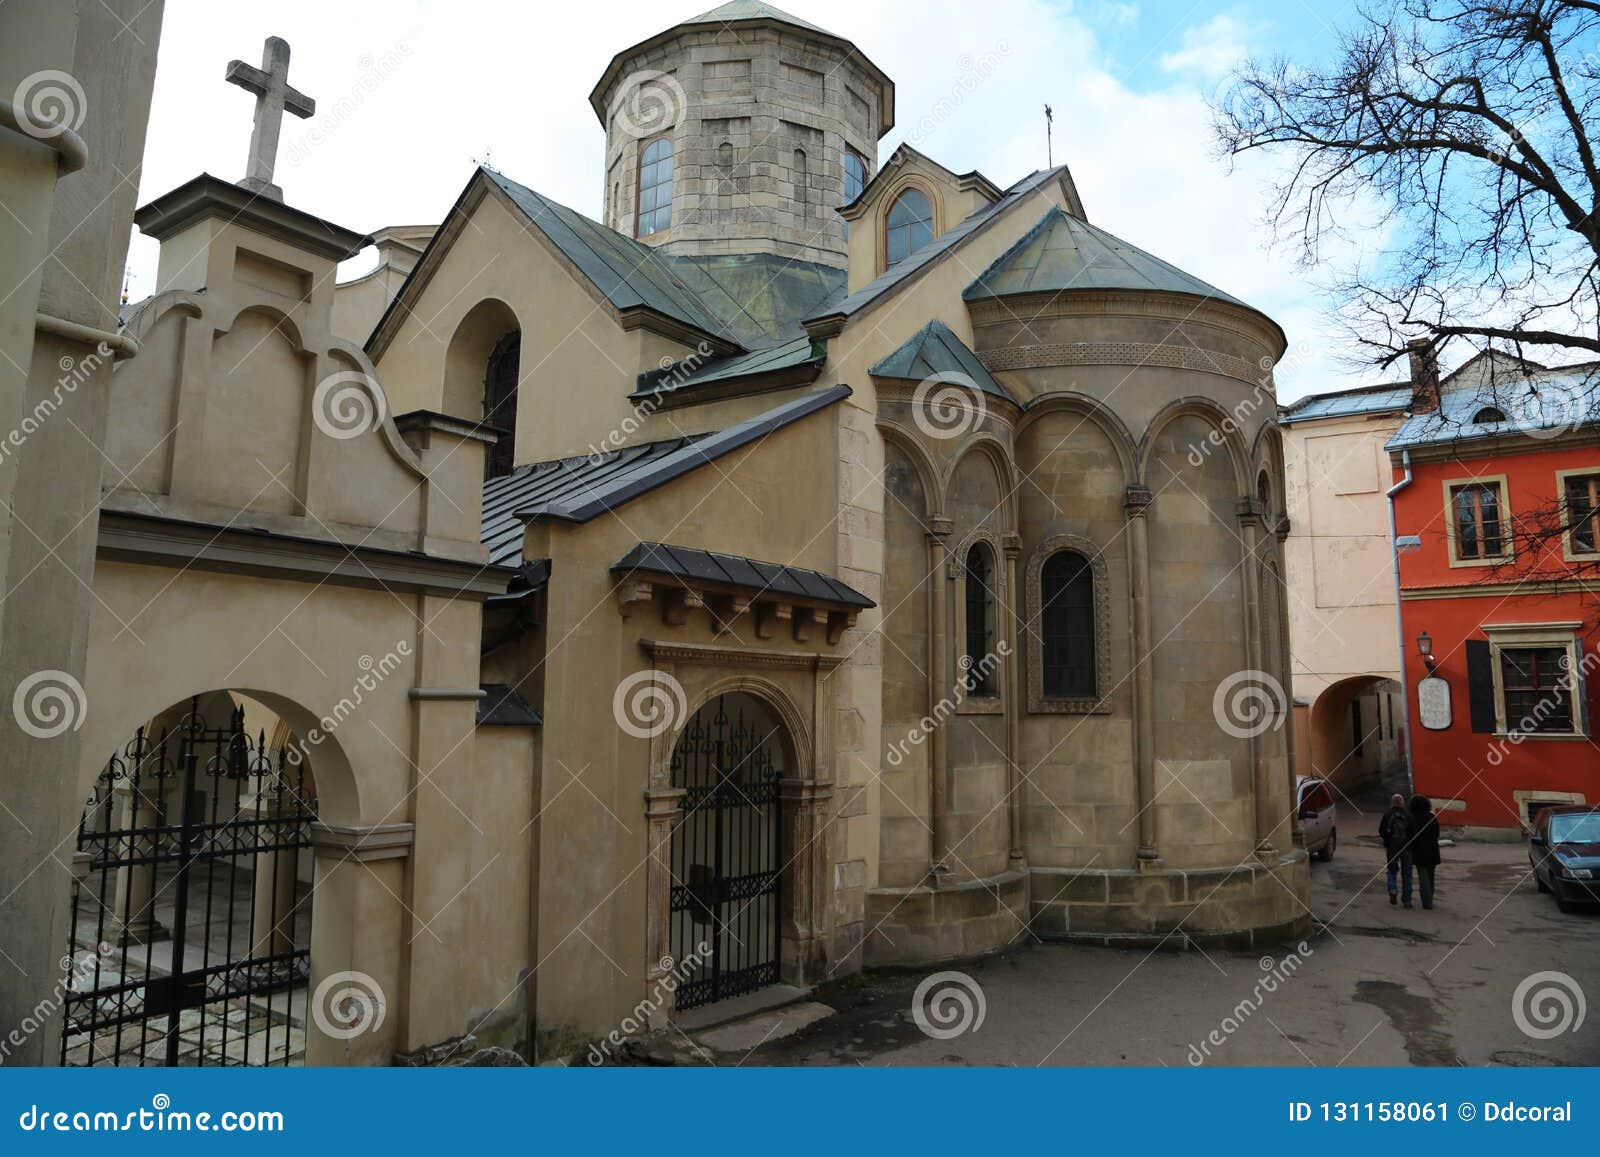 armenian cathedral of the assumption of mary in lviv, western uk